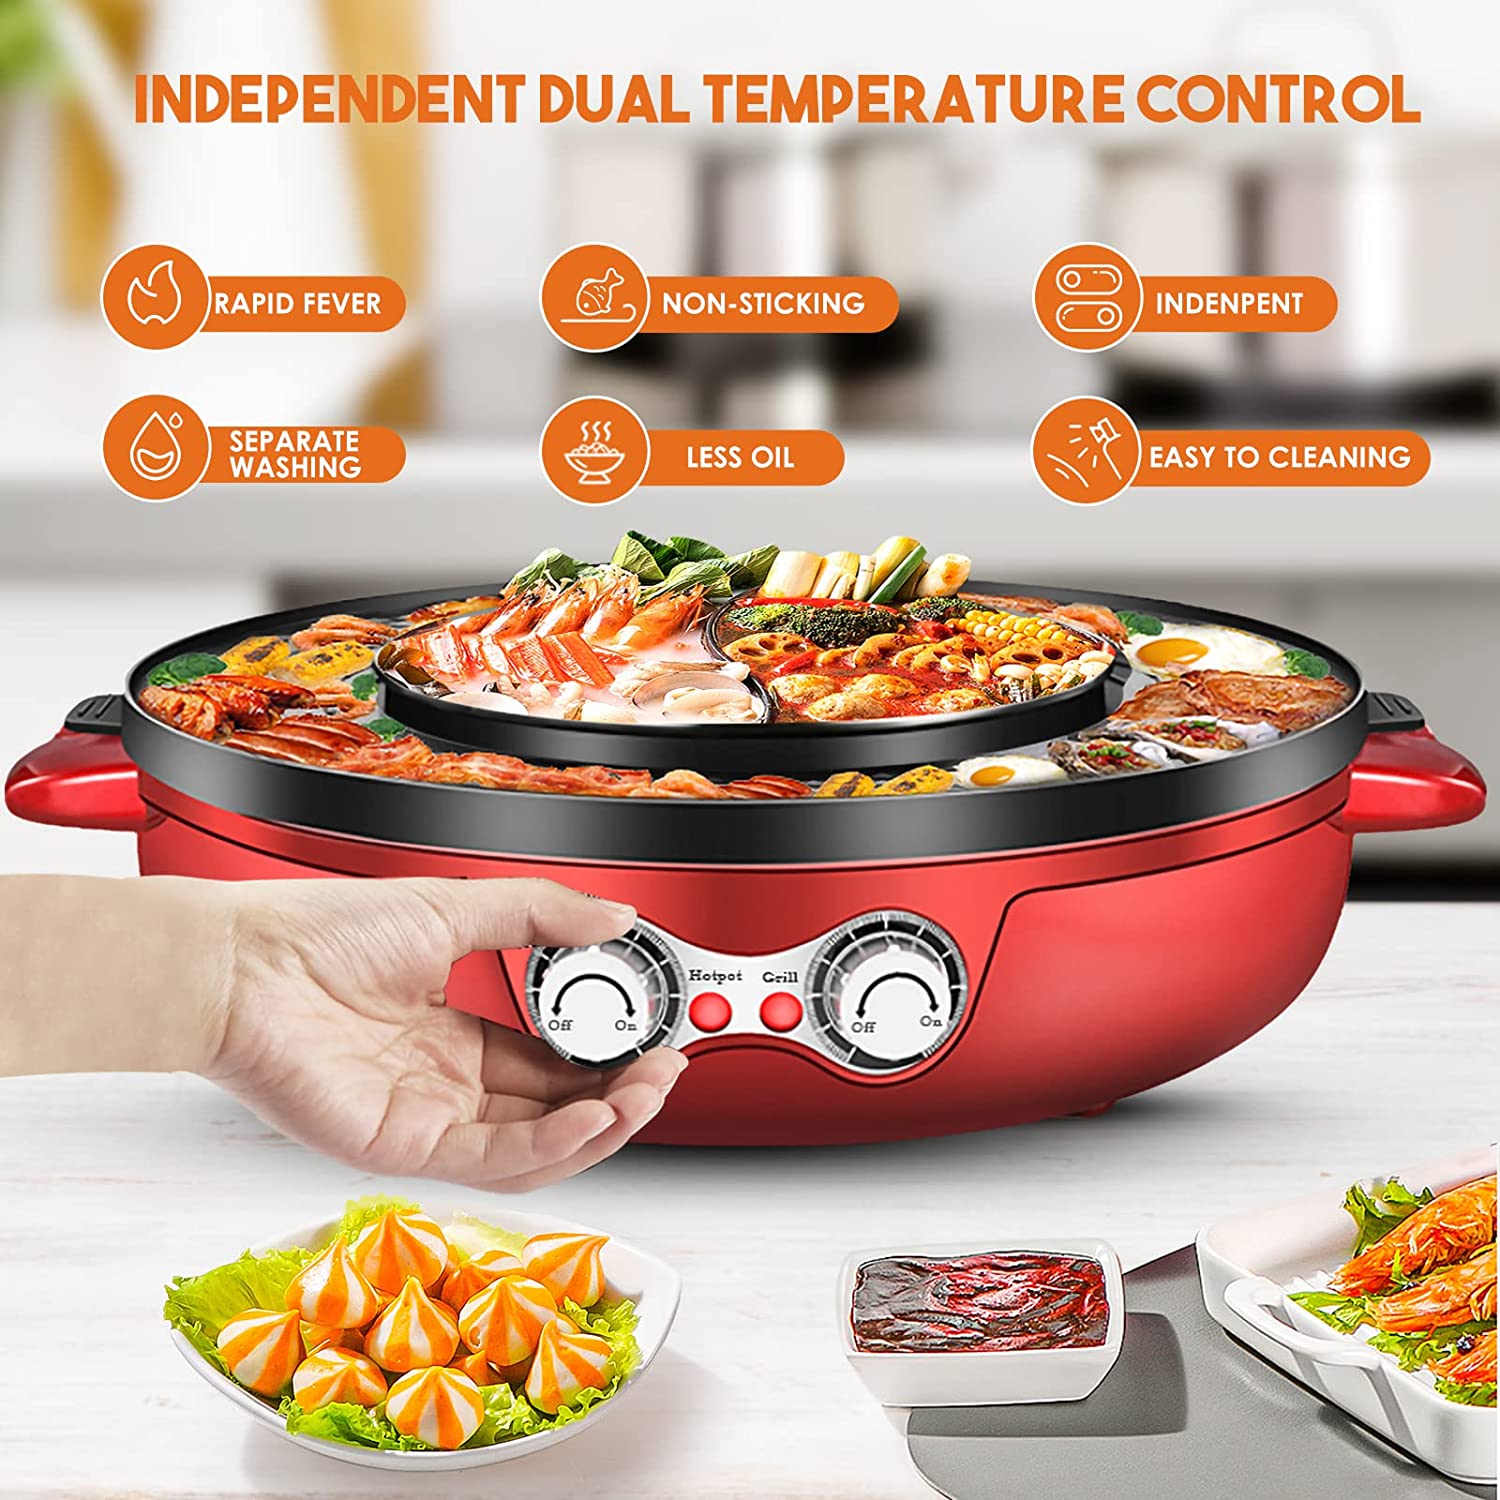 Multifunctional Electric Hot Pot Grill, Indoor Korean BBQ Grill/Self Heating  Hot Pot, Dual Temperature Control Korean Shabu, Non-stick Pan, Coating,Easy  Cleaning for 2-8 people, 2200W 110V 